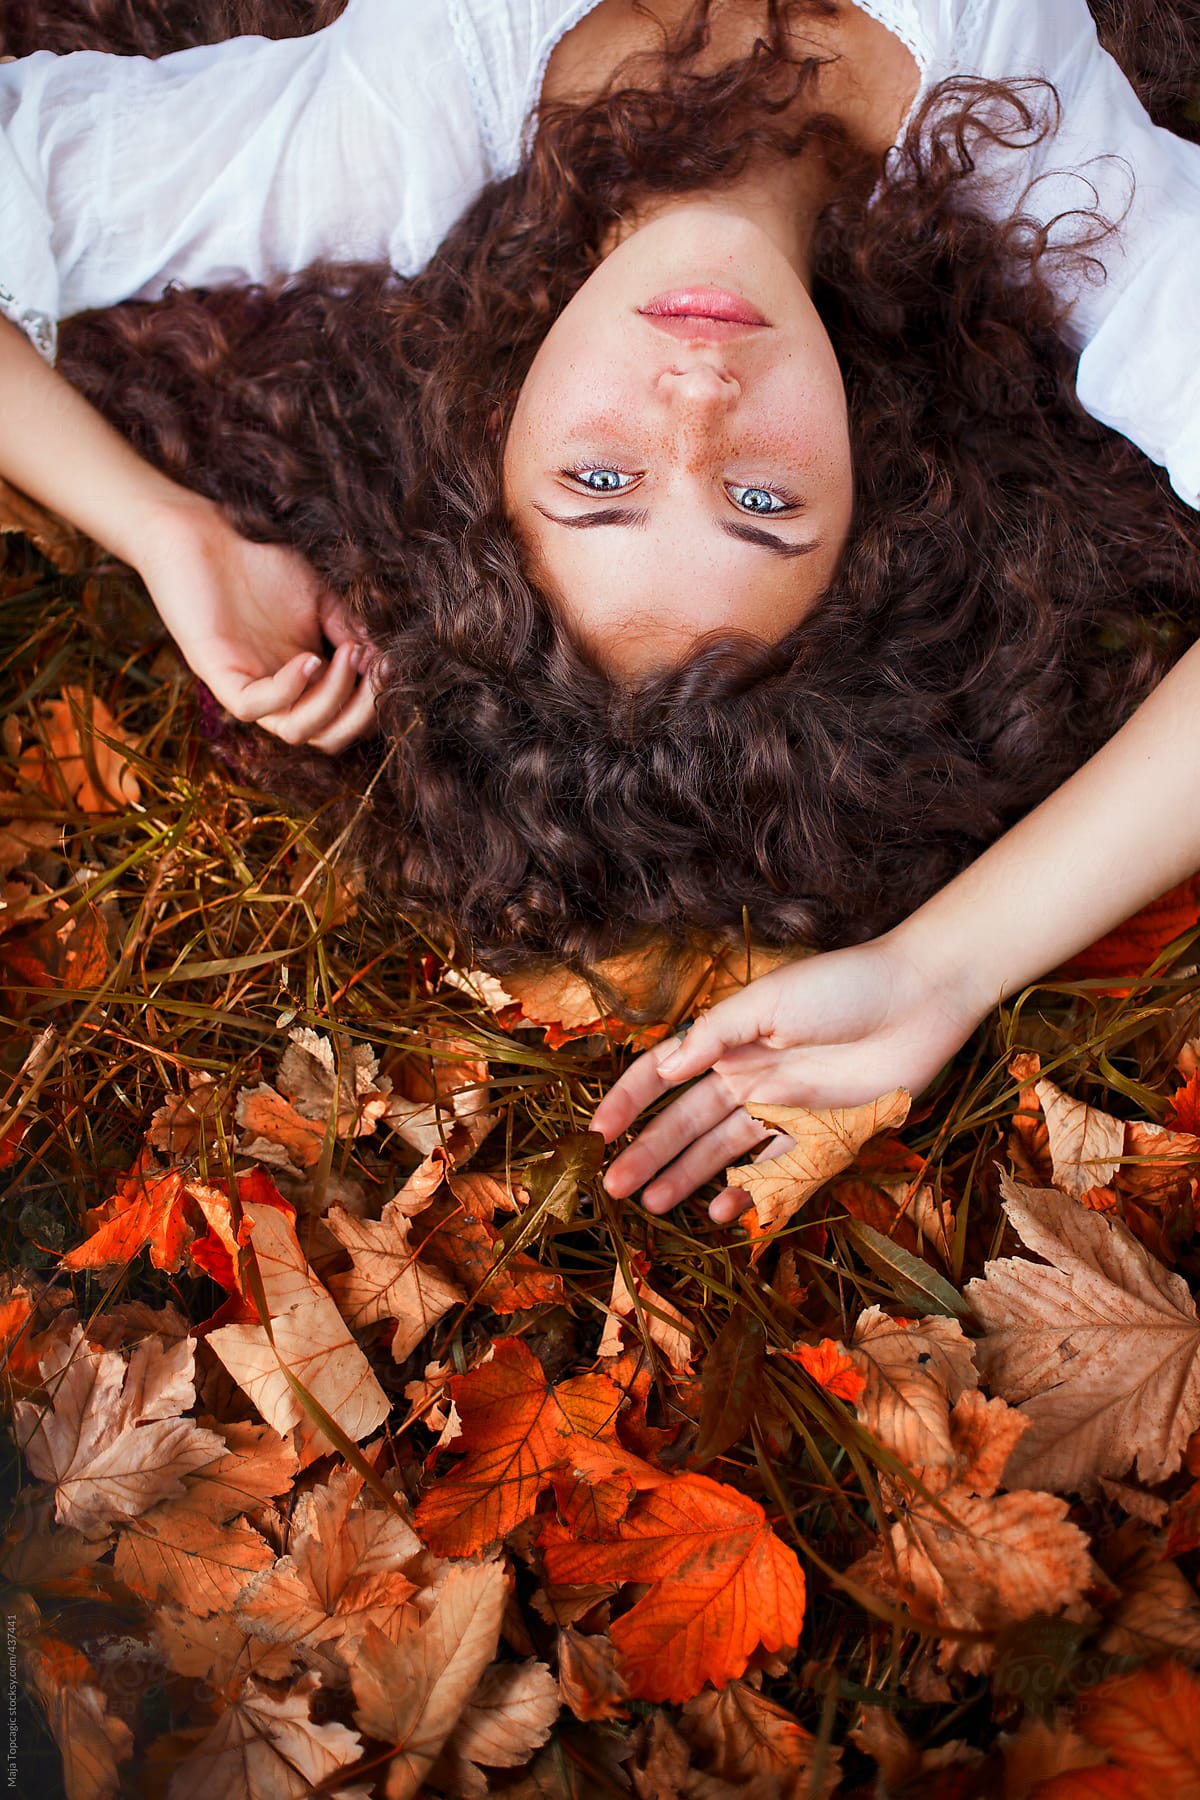 Beautiful young woman with curly hair, blue eyes and freckles lying on the leaves